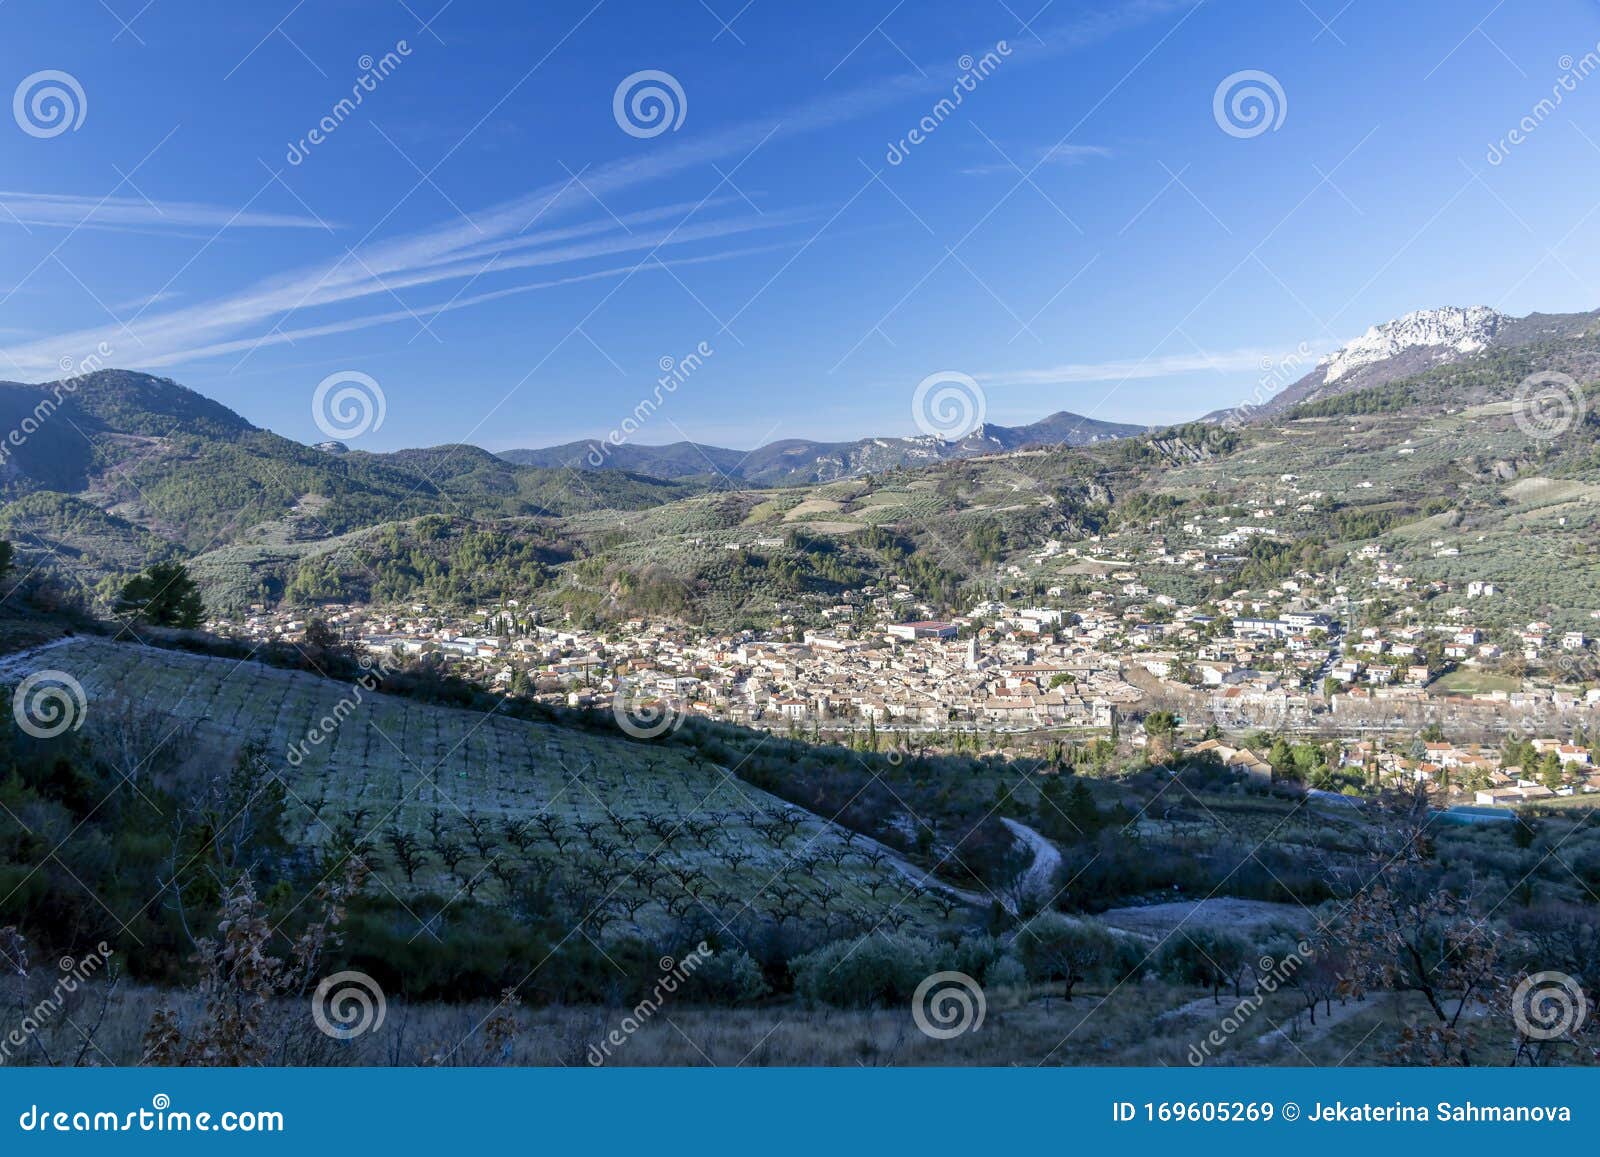 buis-les-baronnies is a commune and village in winter, drome department in southeastern france